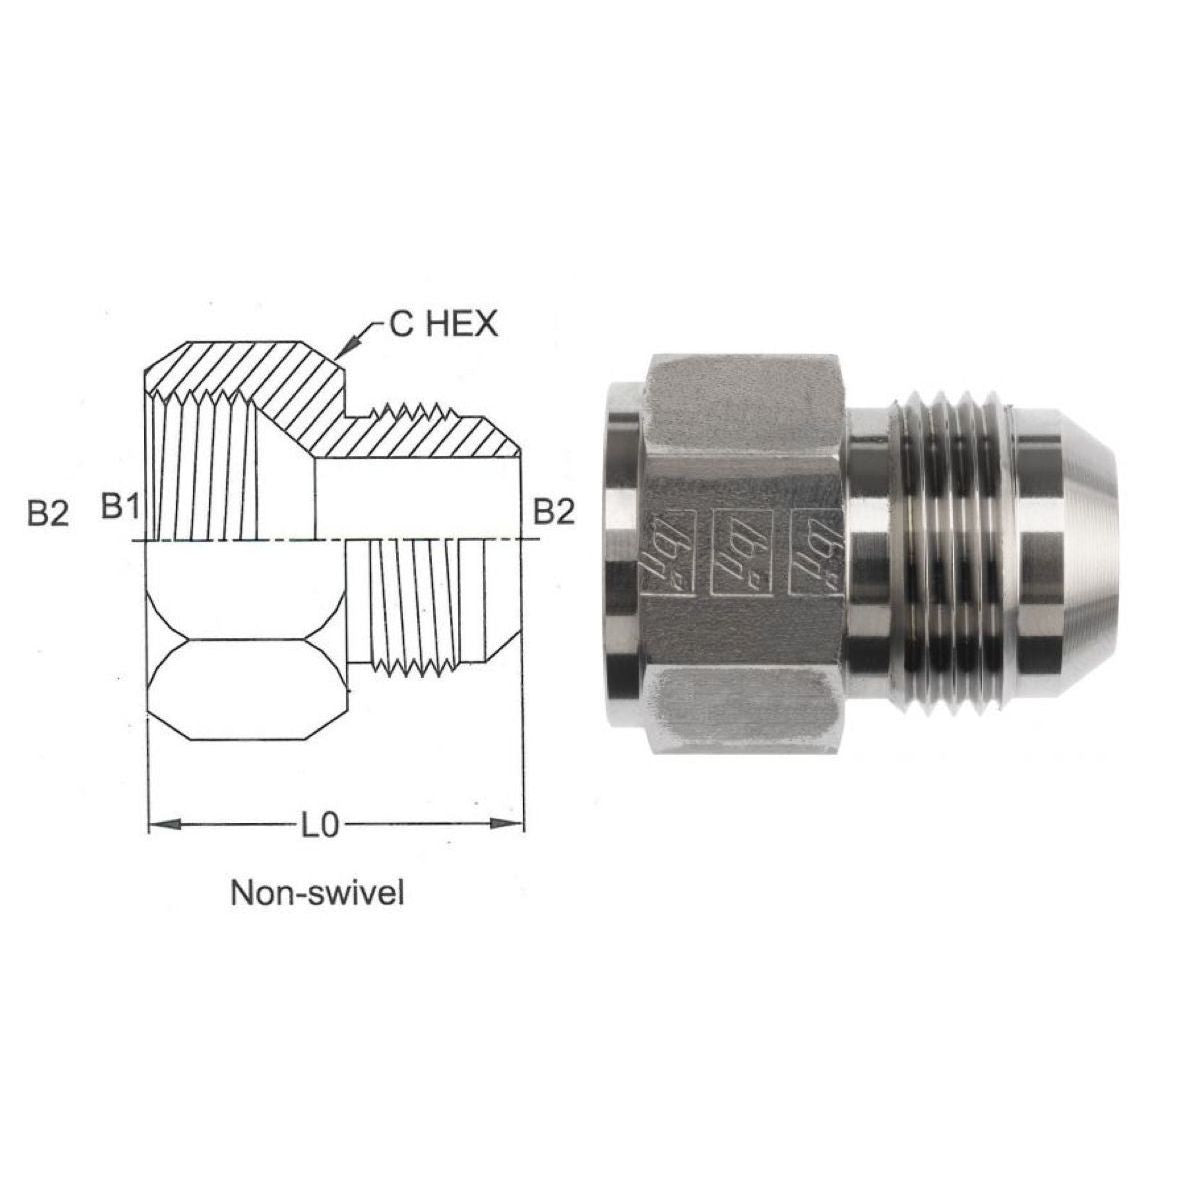 2406-06-08-SS : OneHydraulics  Straight Reducer, Non-Swivel, Straight, 0.375 (3/8") Female JIC x 0.5 (1/2") Male, Stainless Steel, 7200psi